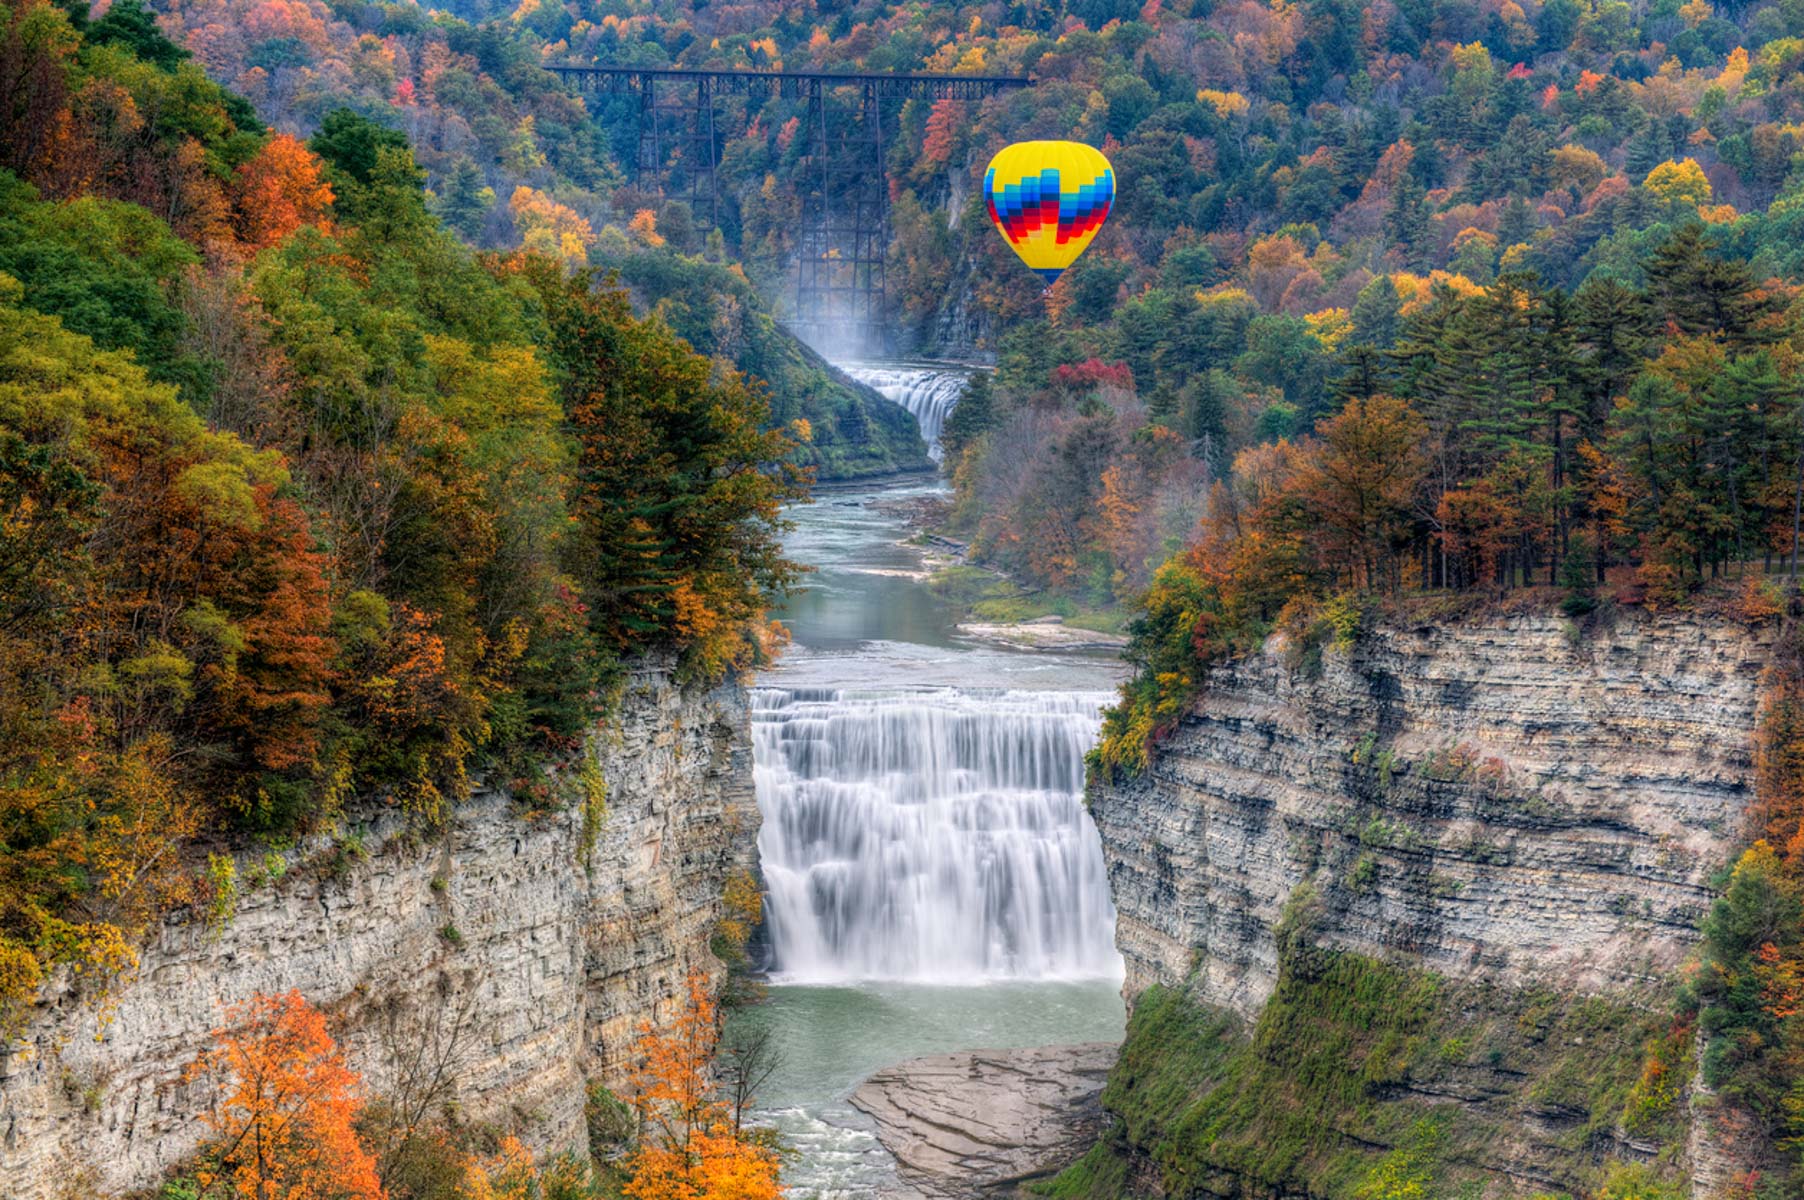 a waterfall with a hot balloon floating over it